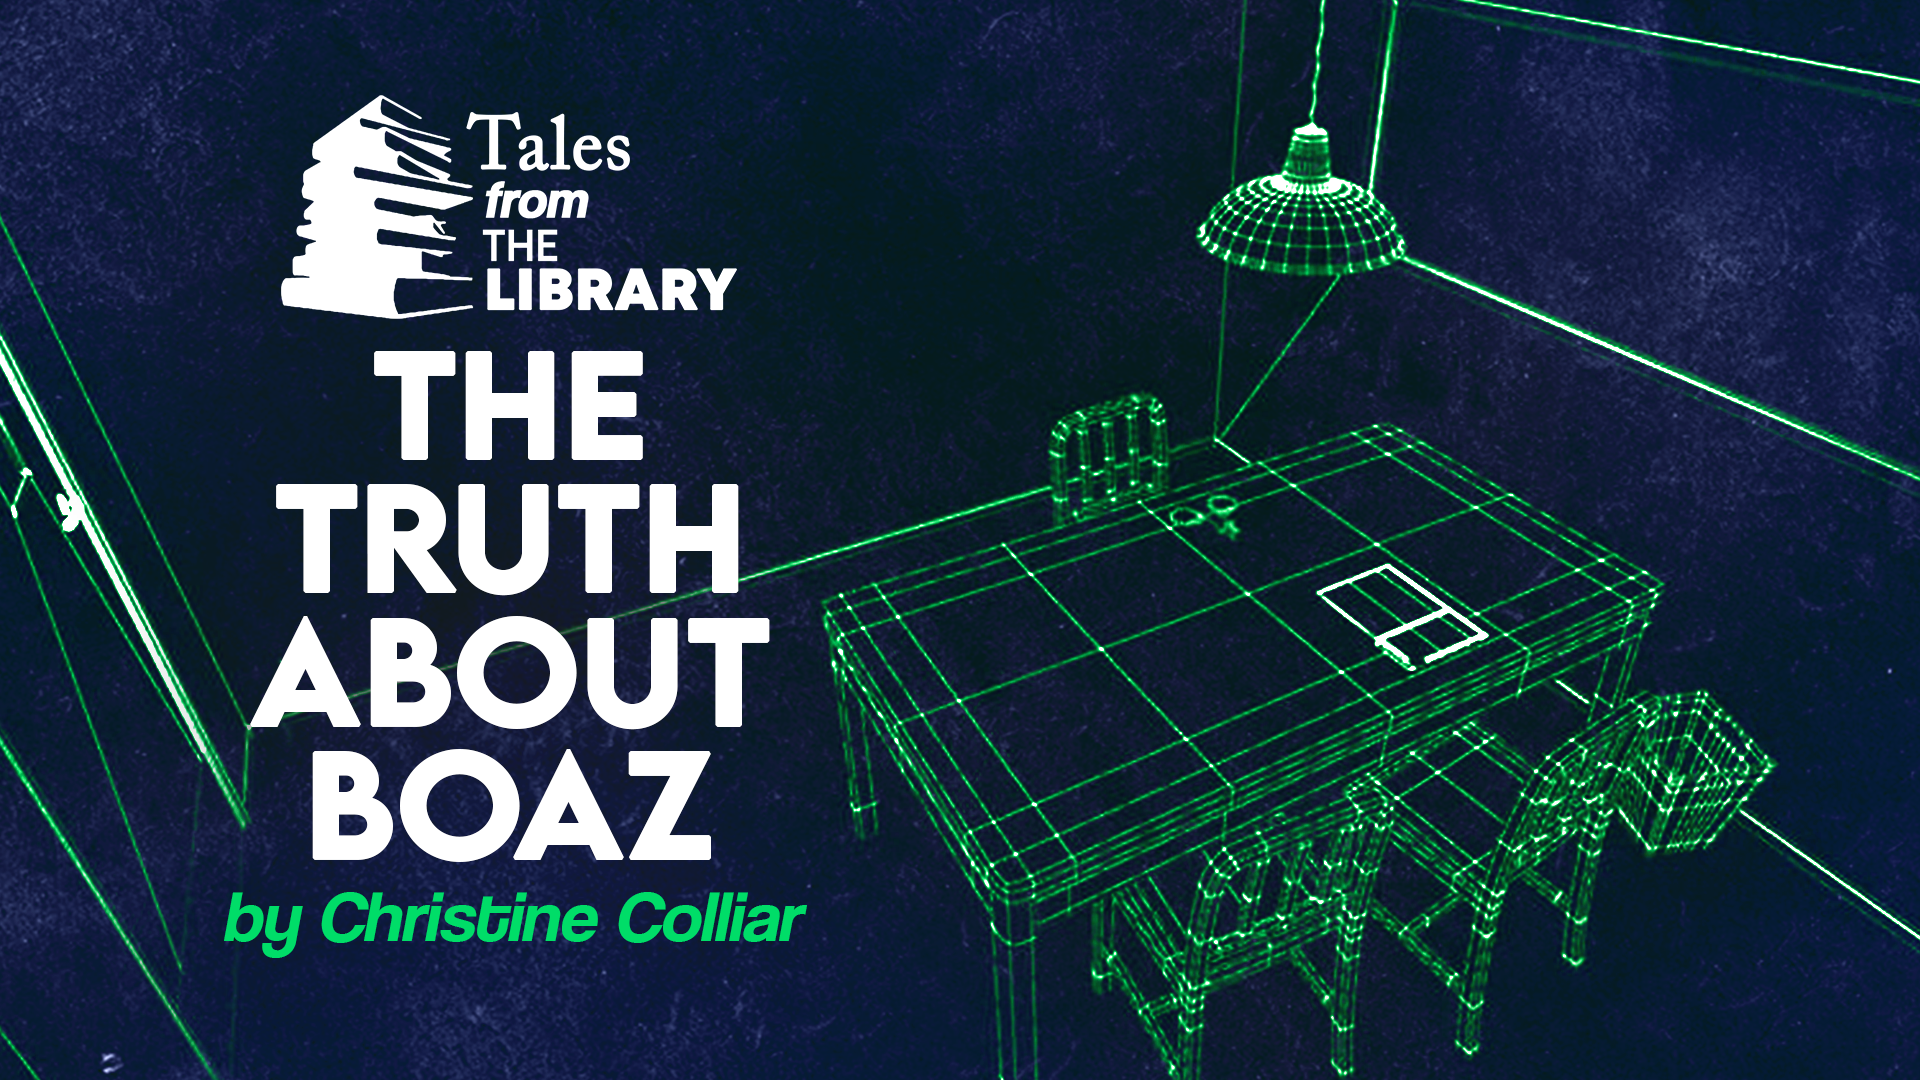 Tales From The Library - The Truth About Boaz